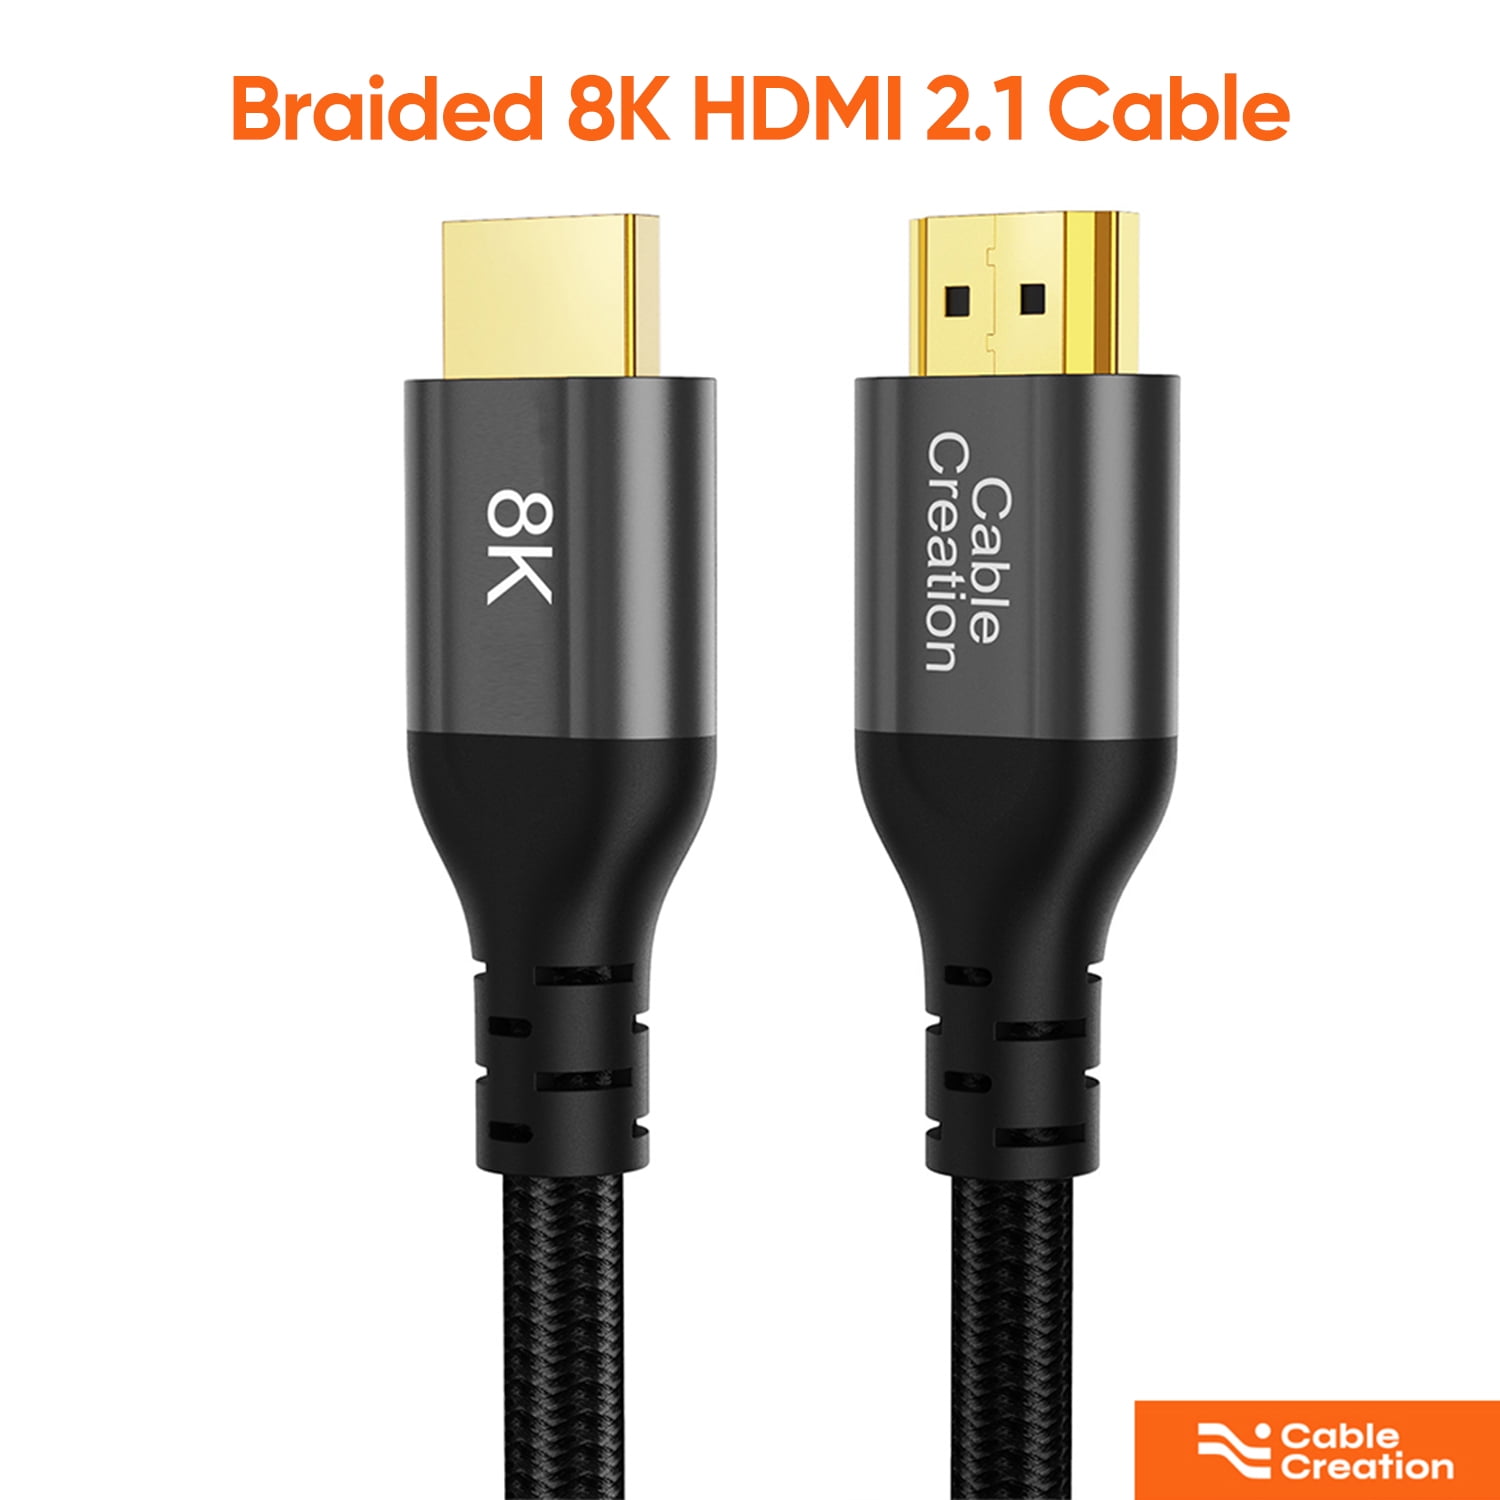 CableCreation HDMI Cable 3.3ft, 2.1 Ultra High Speed 48Gbps HDMI HDR Male to Male Cable, Braided HDMI EARC Cord for Apple TV, Roku, Xbox,Samsung, QLED, Sony, LG, Playstation, PS5, PS4 and